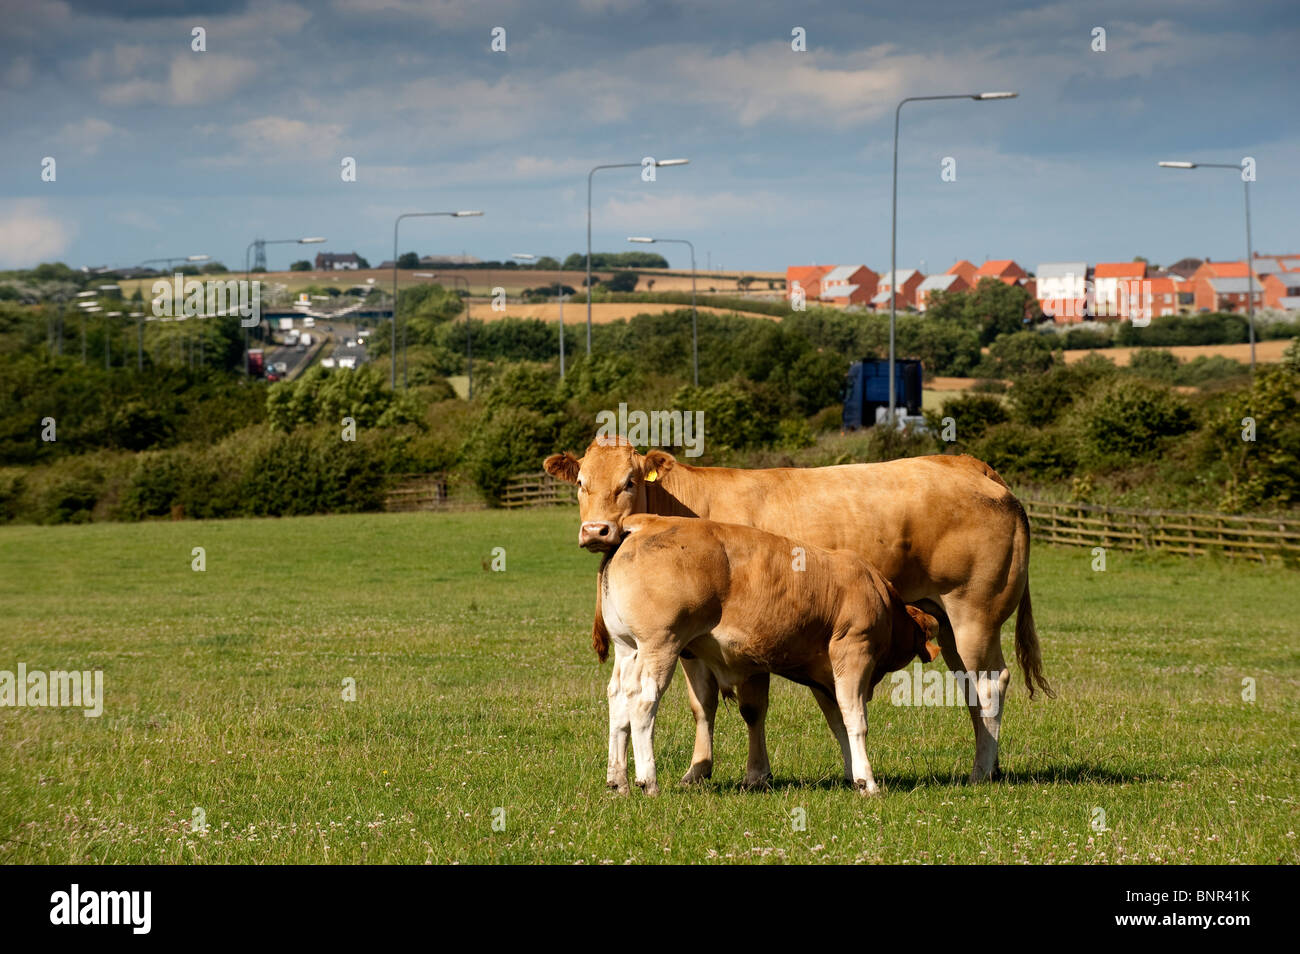 Cattle in field on the edge of town, showing urban / rural divide Stock Photo